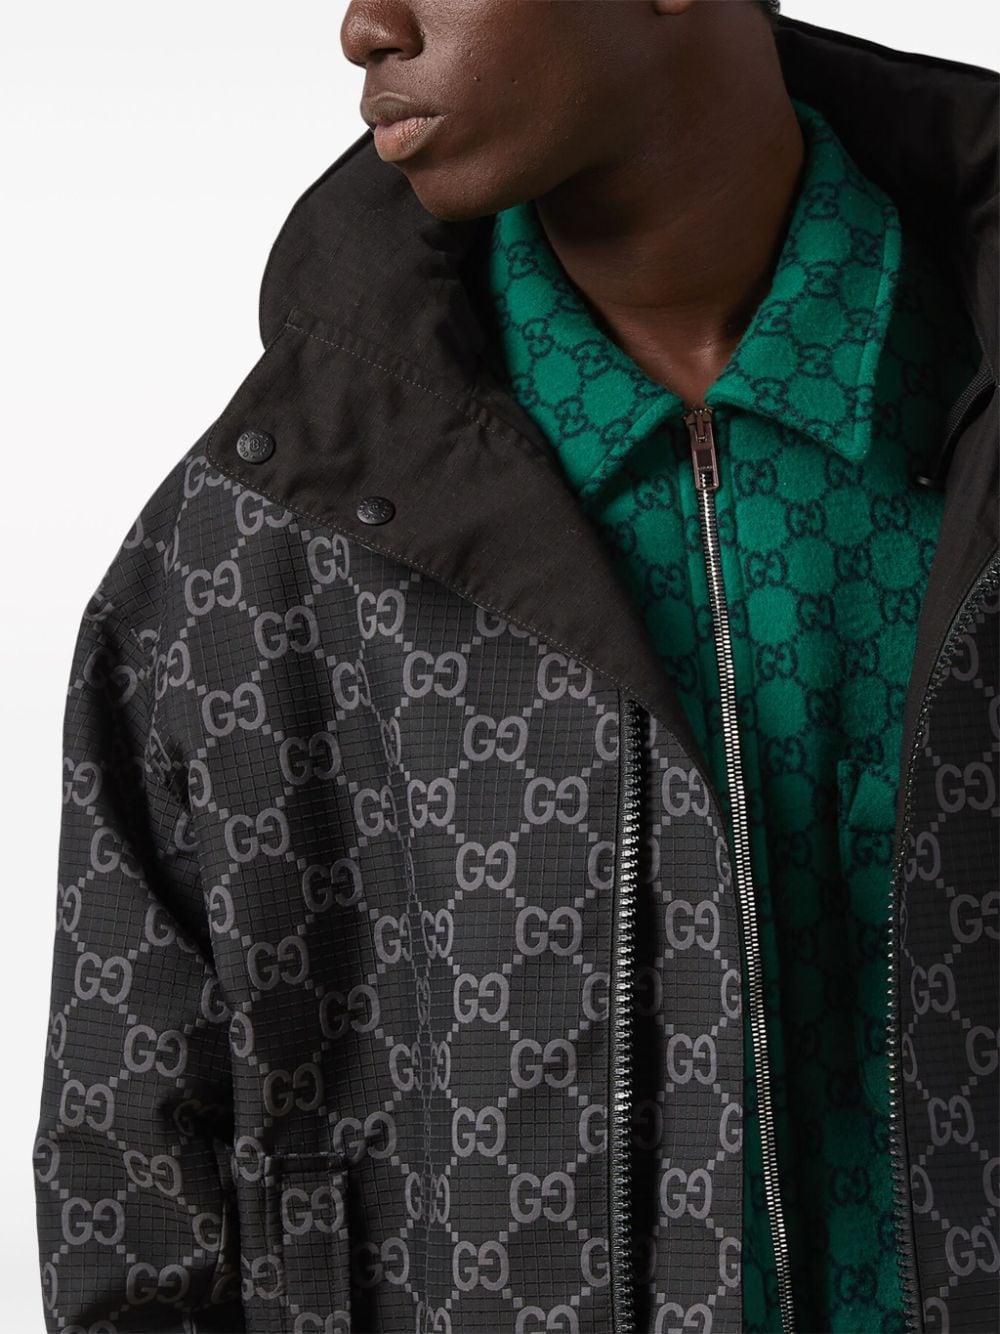 Gucci Padded Jacket in Black for Men | Lyst